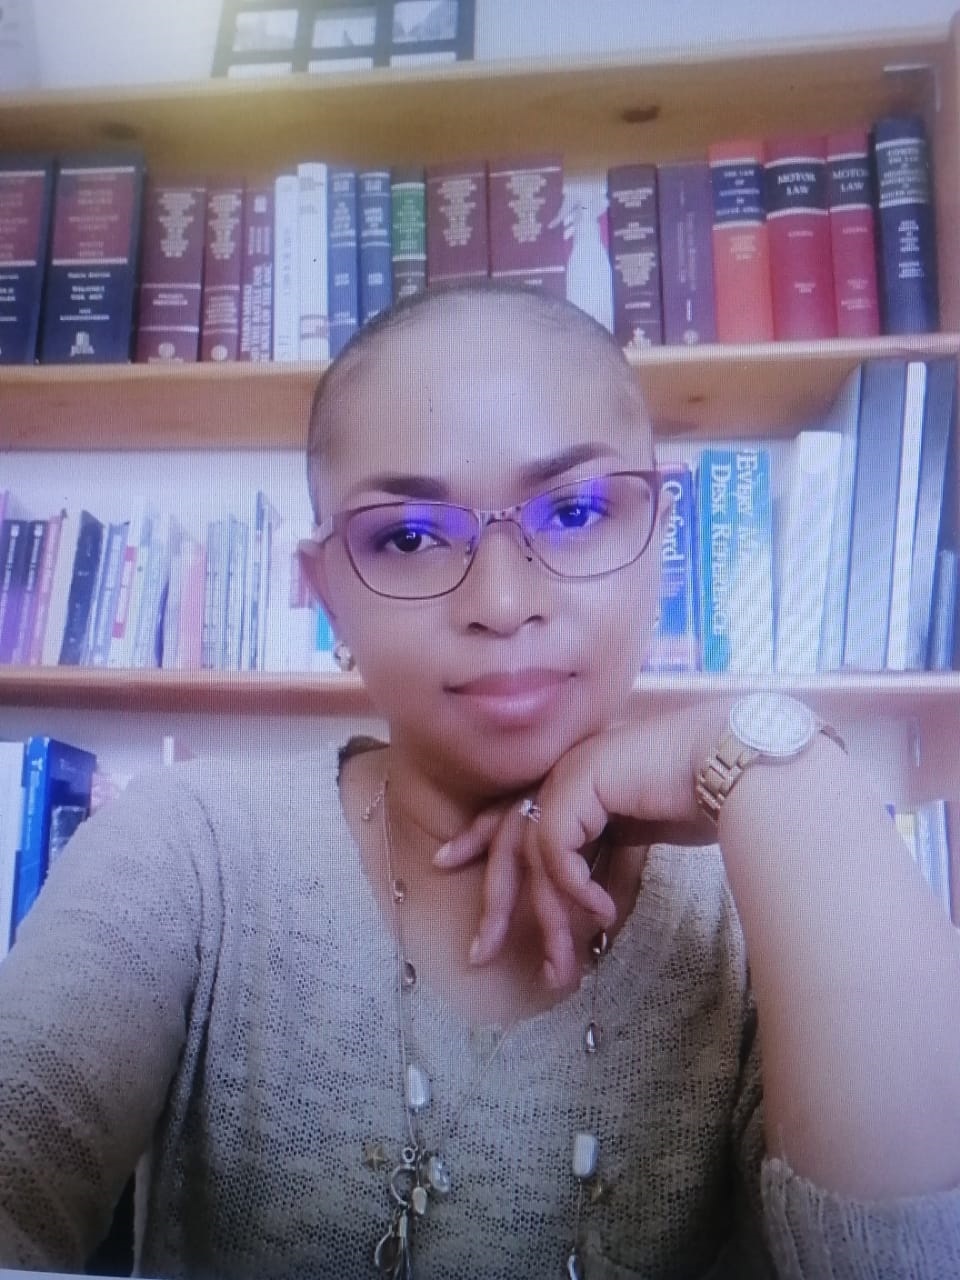 The body of Heilbron Magistrate Mamello Thamae was found in the boot of her car in Lesotho.